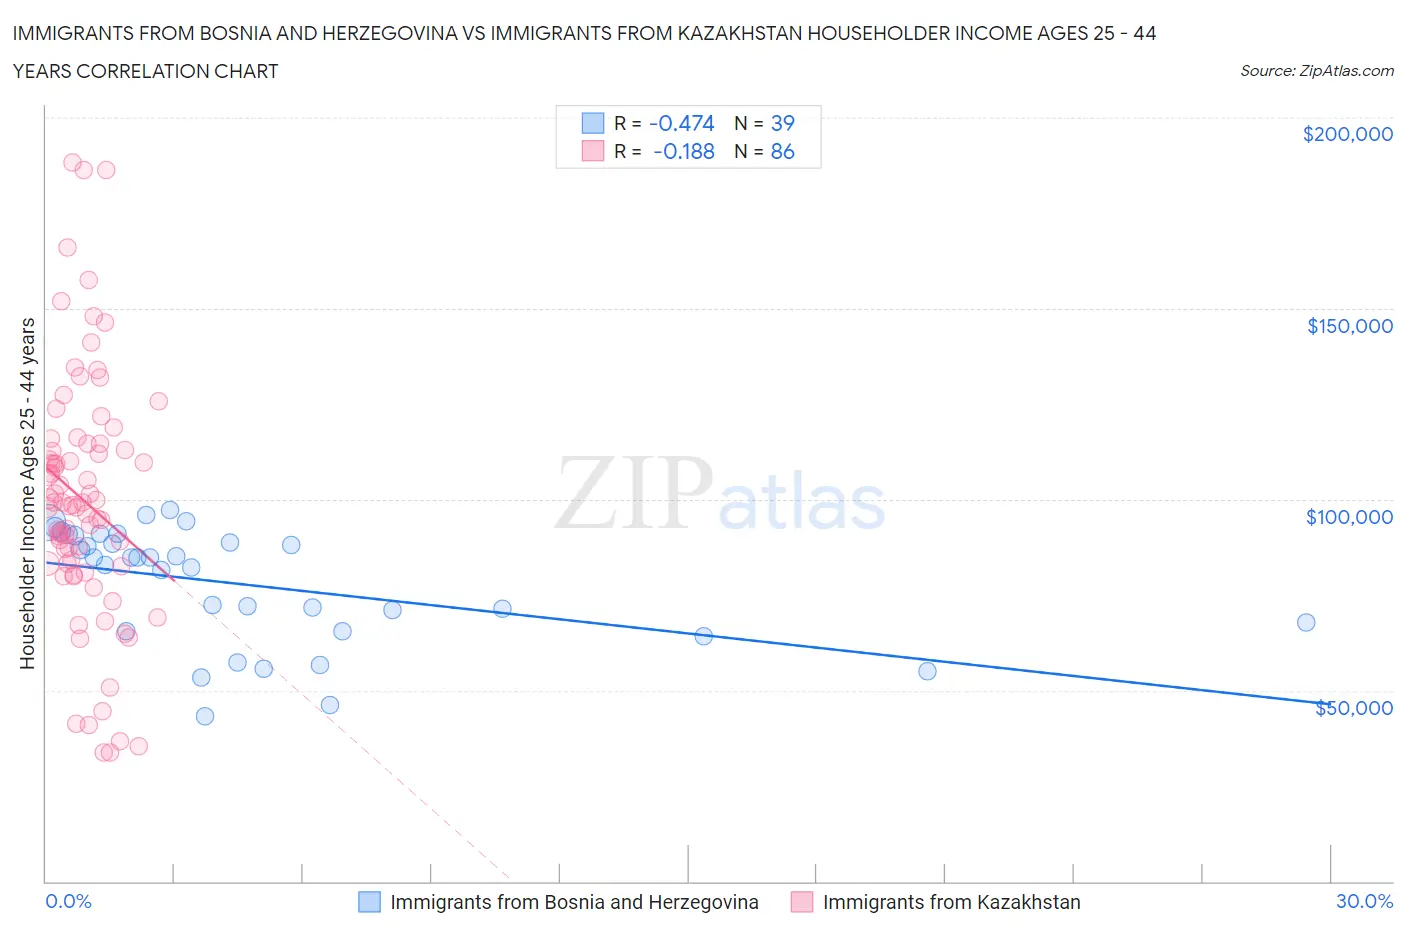 Immigrants from Bosnia and Herzegovina vs Immigrants from Kazakhstan Householder Income Ages 25 - 44 years